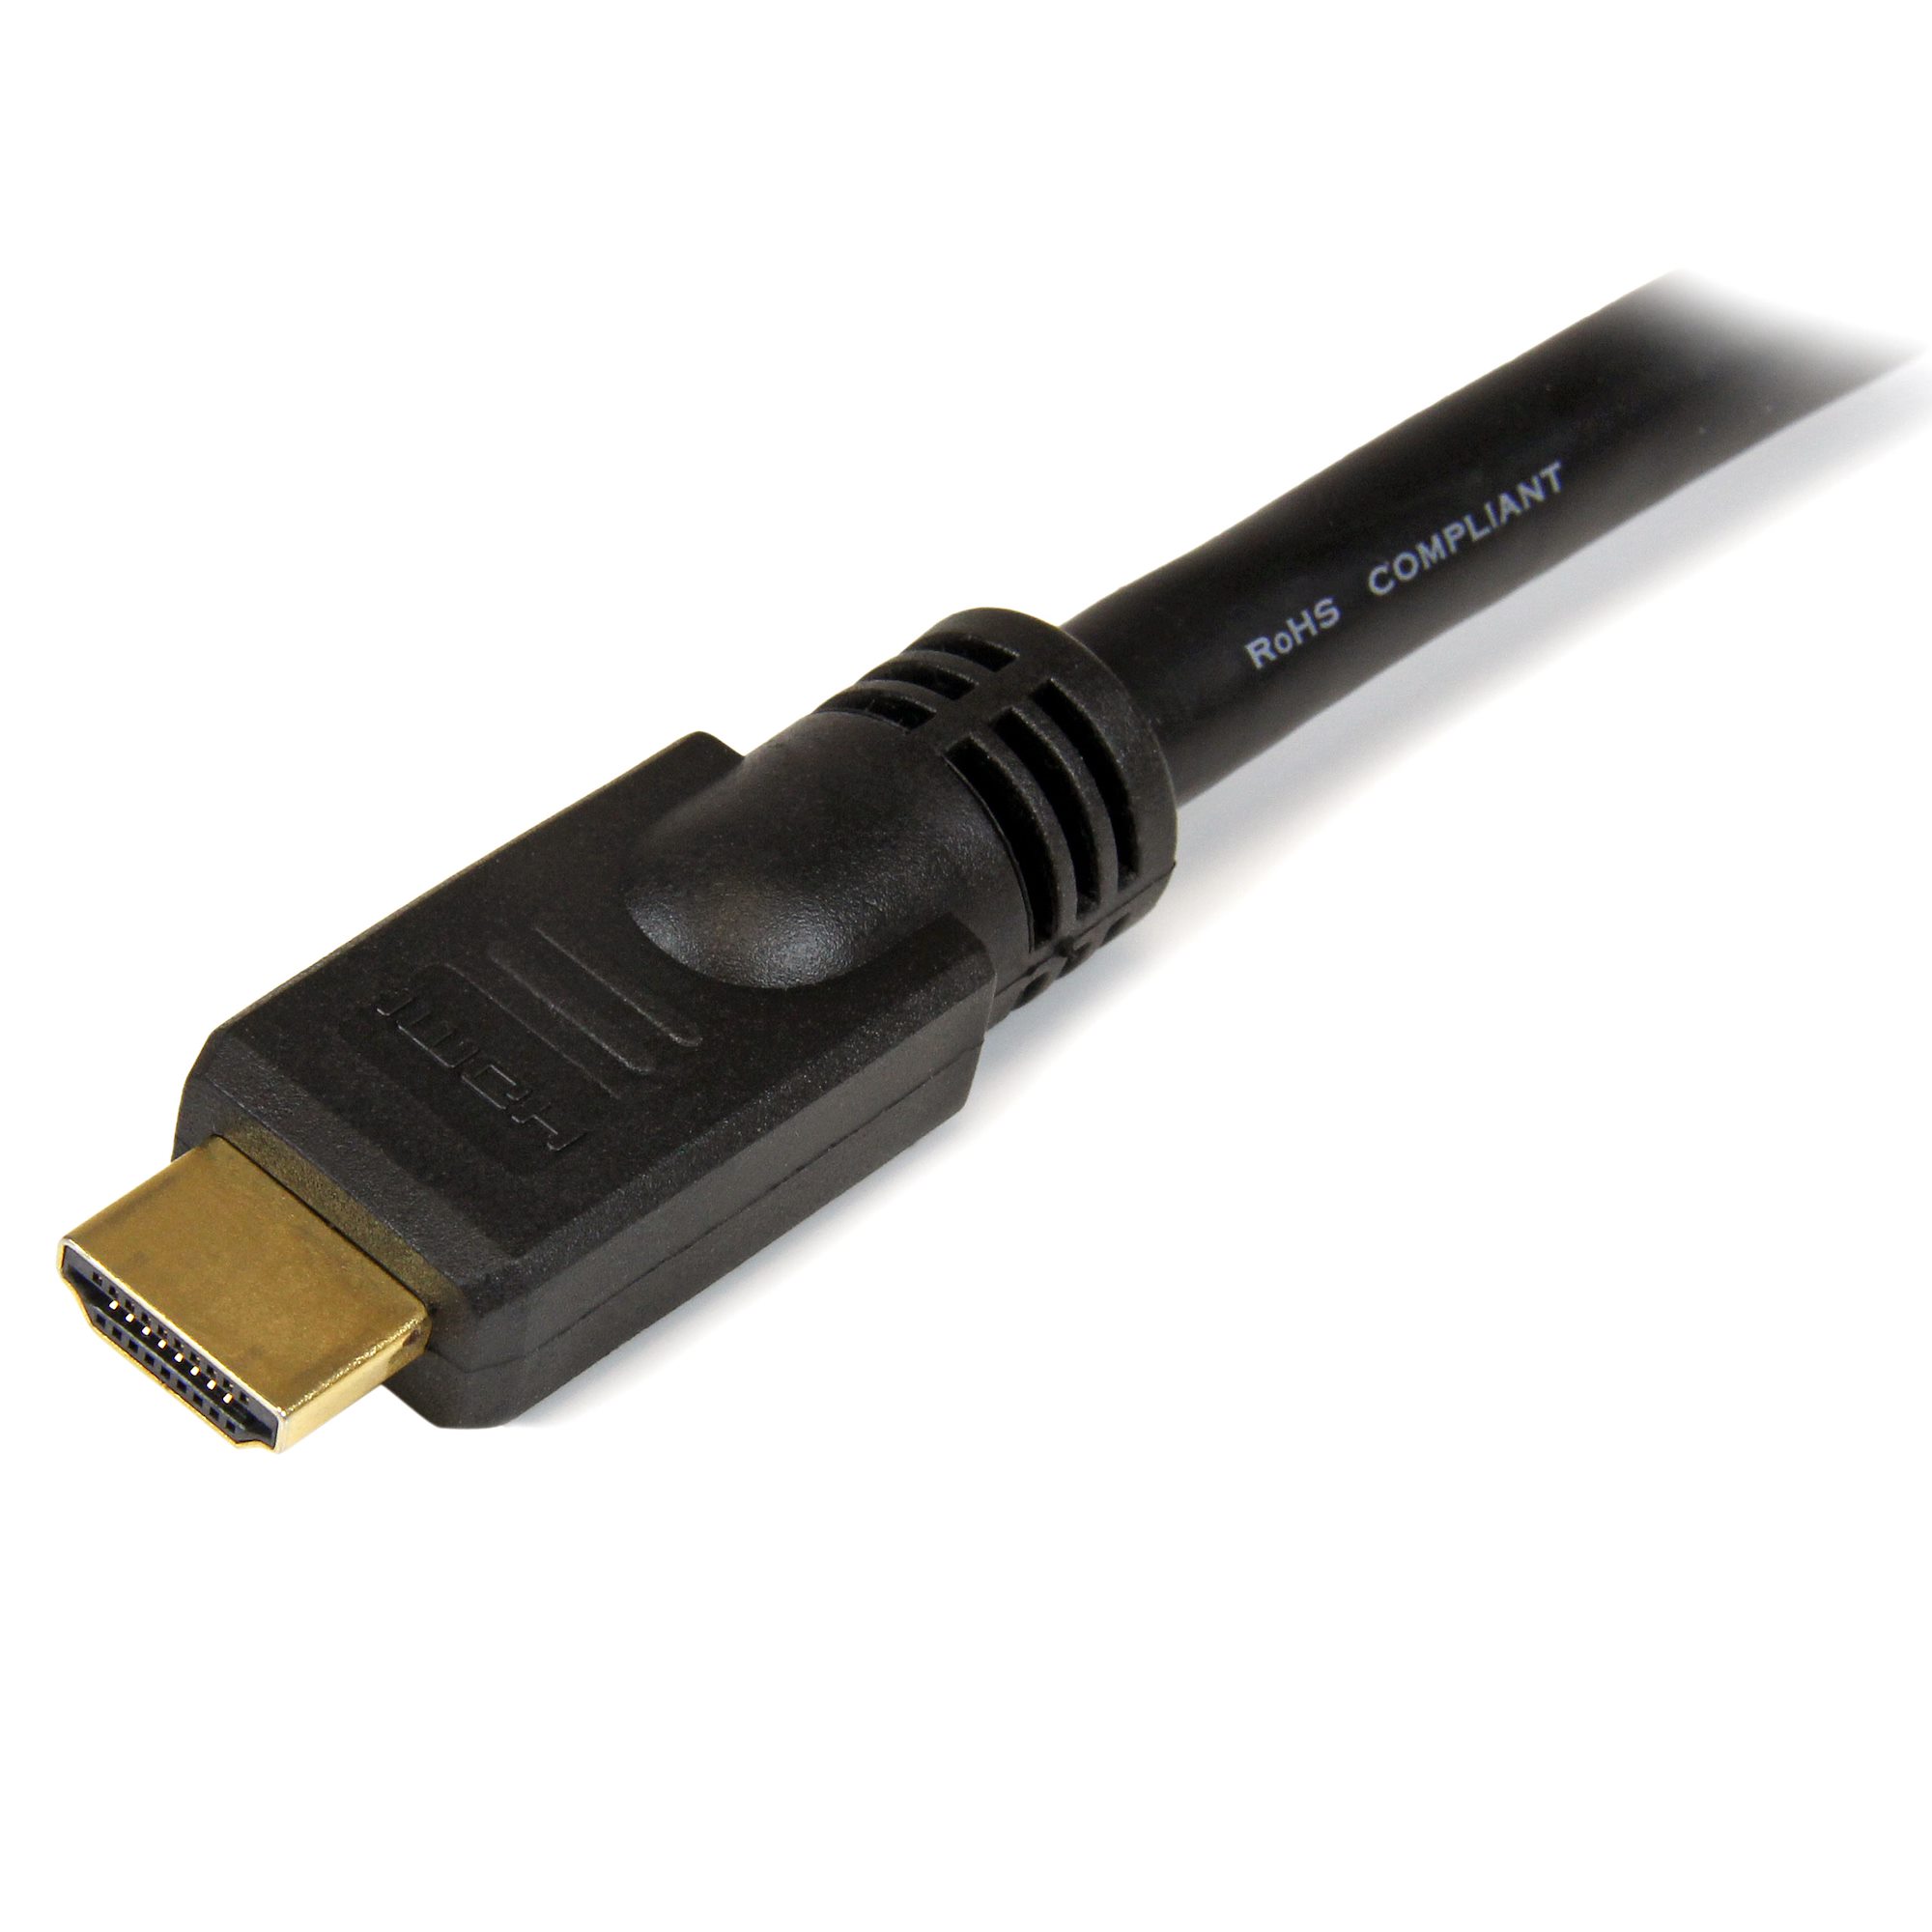 7m High Speed HDMI Cable - Ultra HD 4k x 2k HDMI Cable - HDMI to HDMI M/M